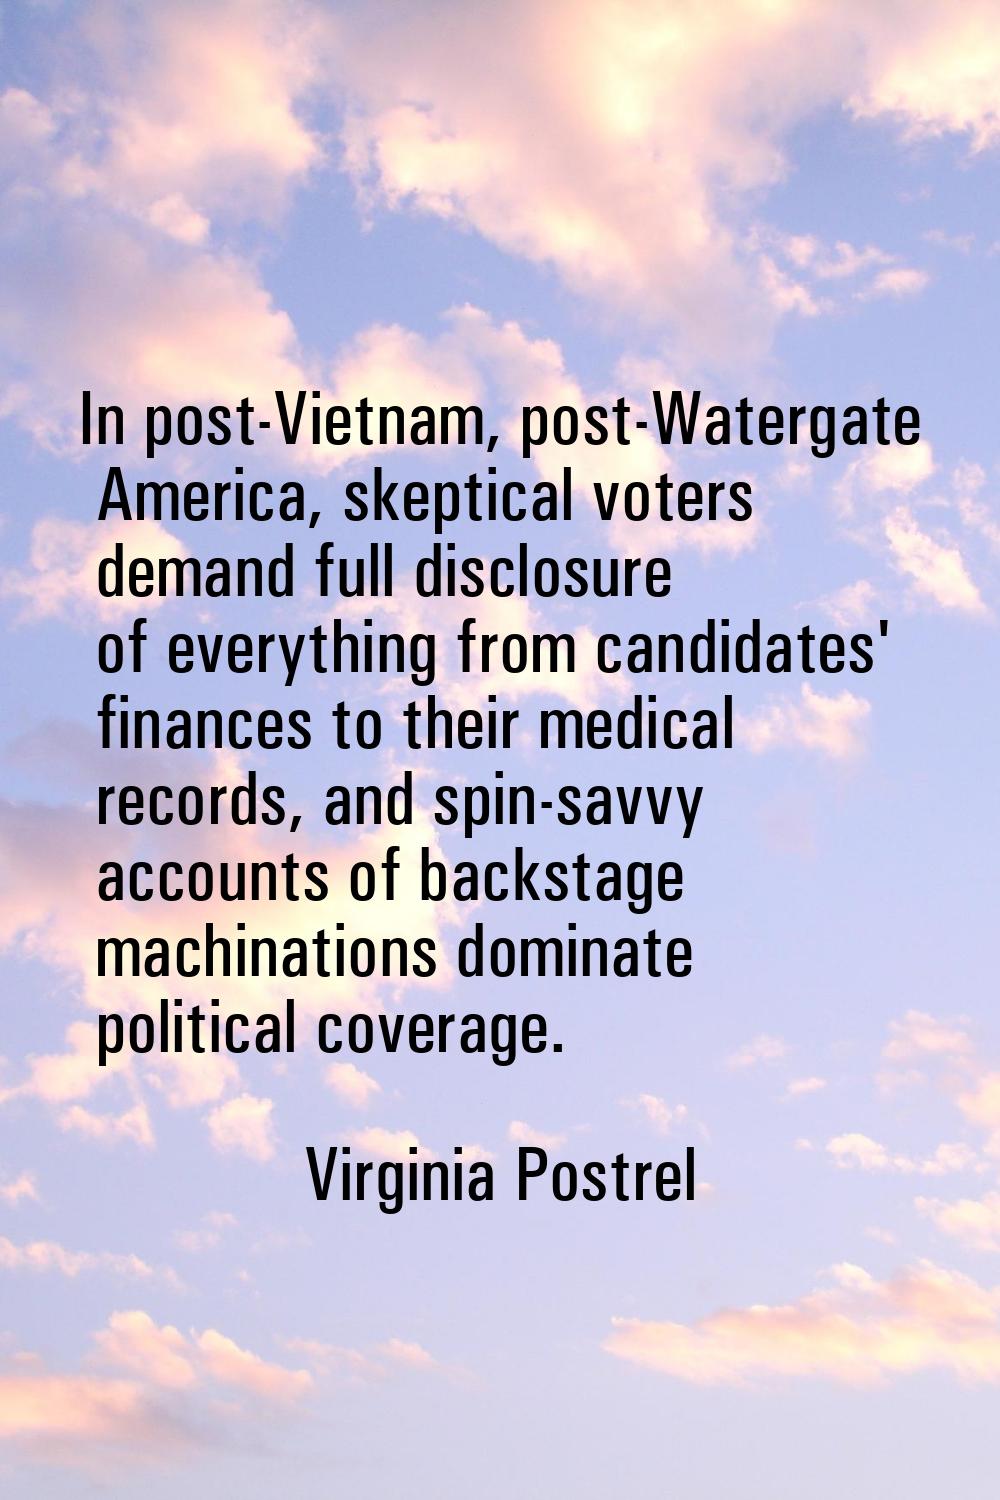 In post-Vietnam, post-Watergate America, skeptical voters demand full disclosure of everything from